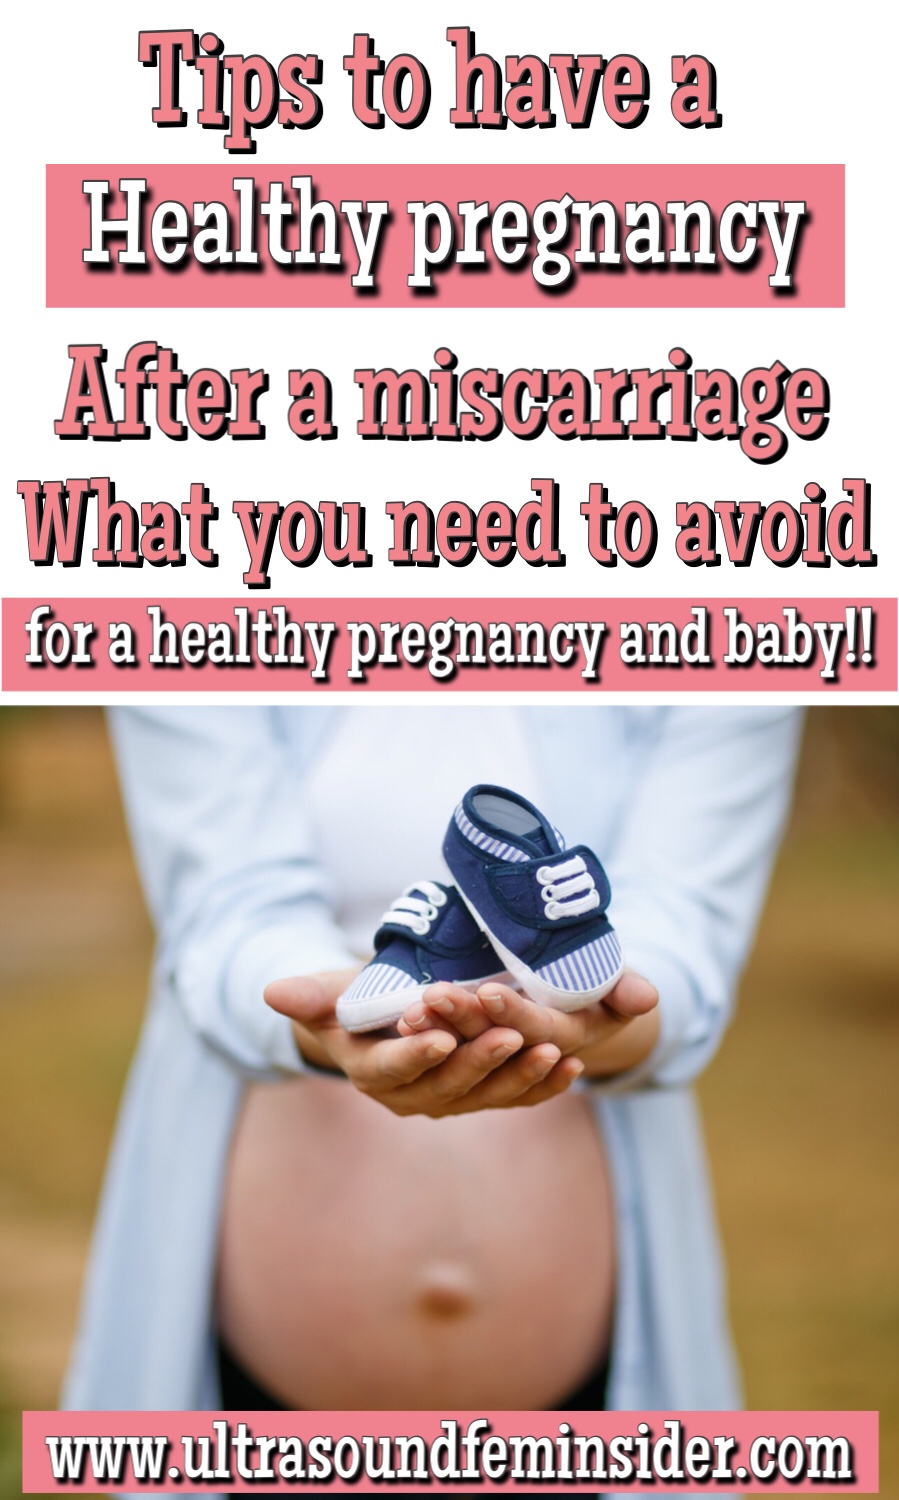 Tips to have a healthy pregnancy after a miscarriage. Things to avoid for a healthy pregnancy. 